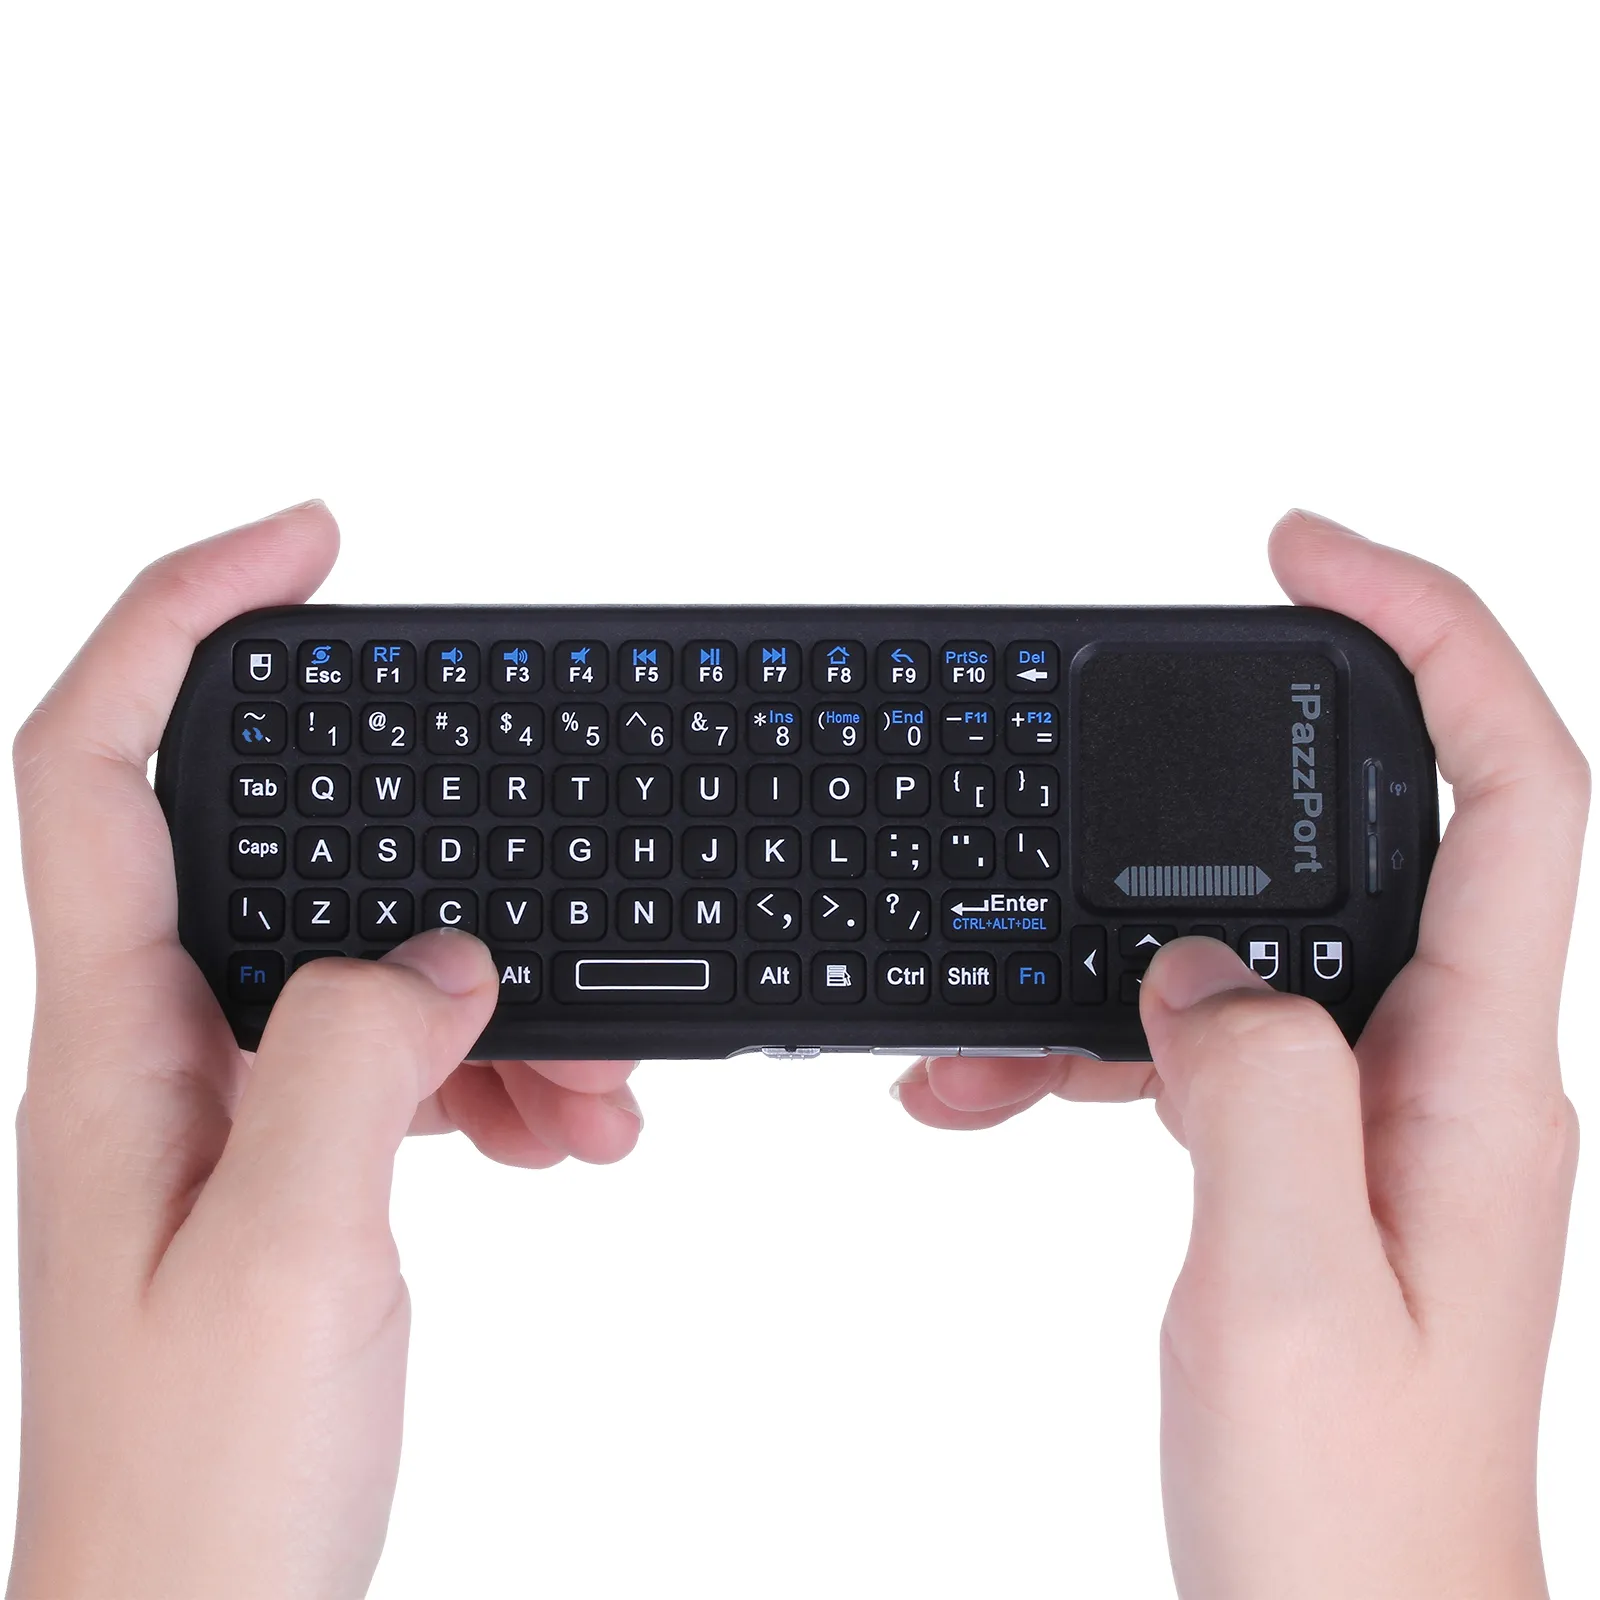 

iPazzPort Mini Bluetooth＆ 2.4GHz Wireless Keyboard with Touchpad MouseCombo for Android TV Box/PC/Tablet/PS4/Raspberry Pi 3/HTPC